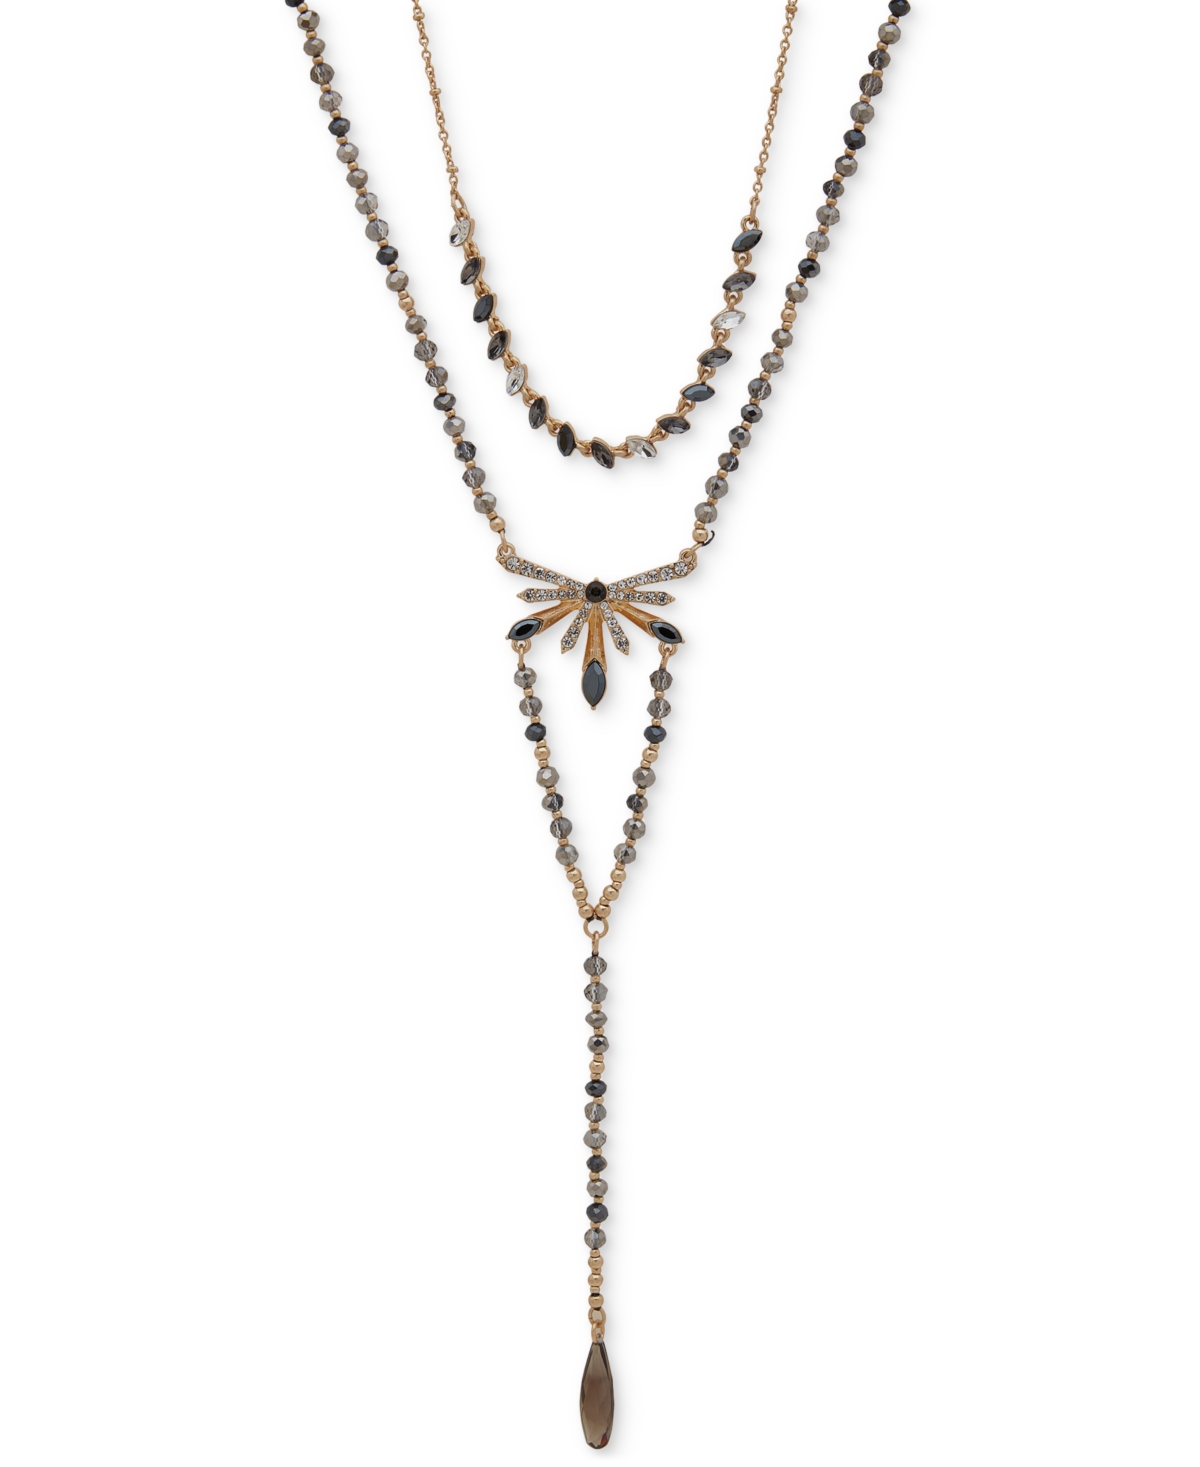 Lonna & Lilly Gold-tone Gray Stone 24" Multi Row Lariat Necklace